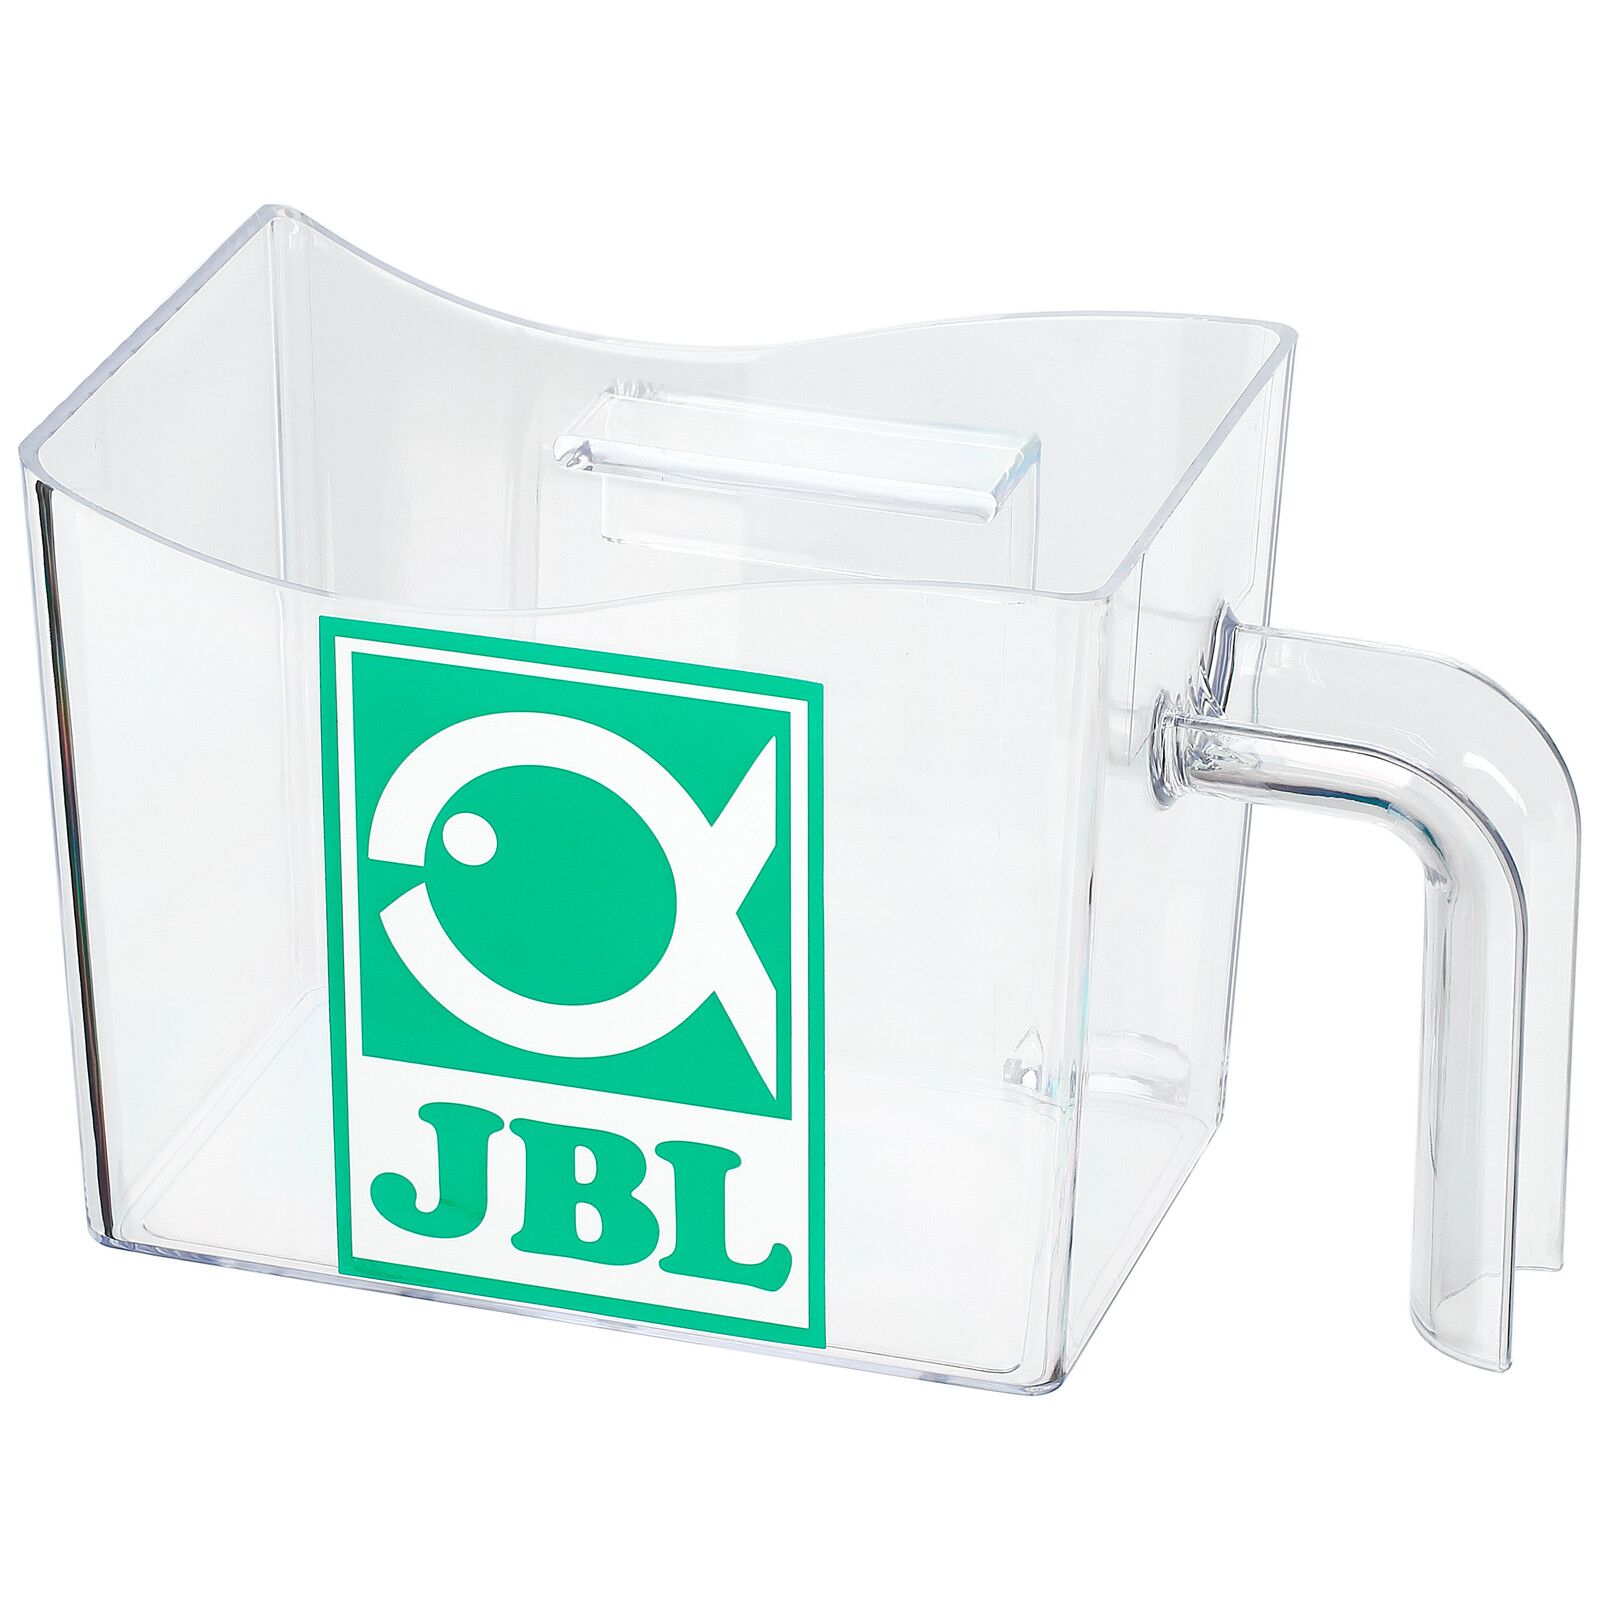 JBL - Fish Catching Cup